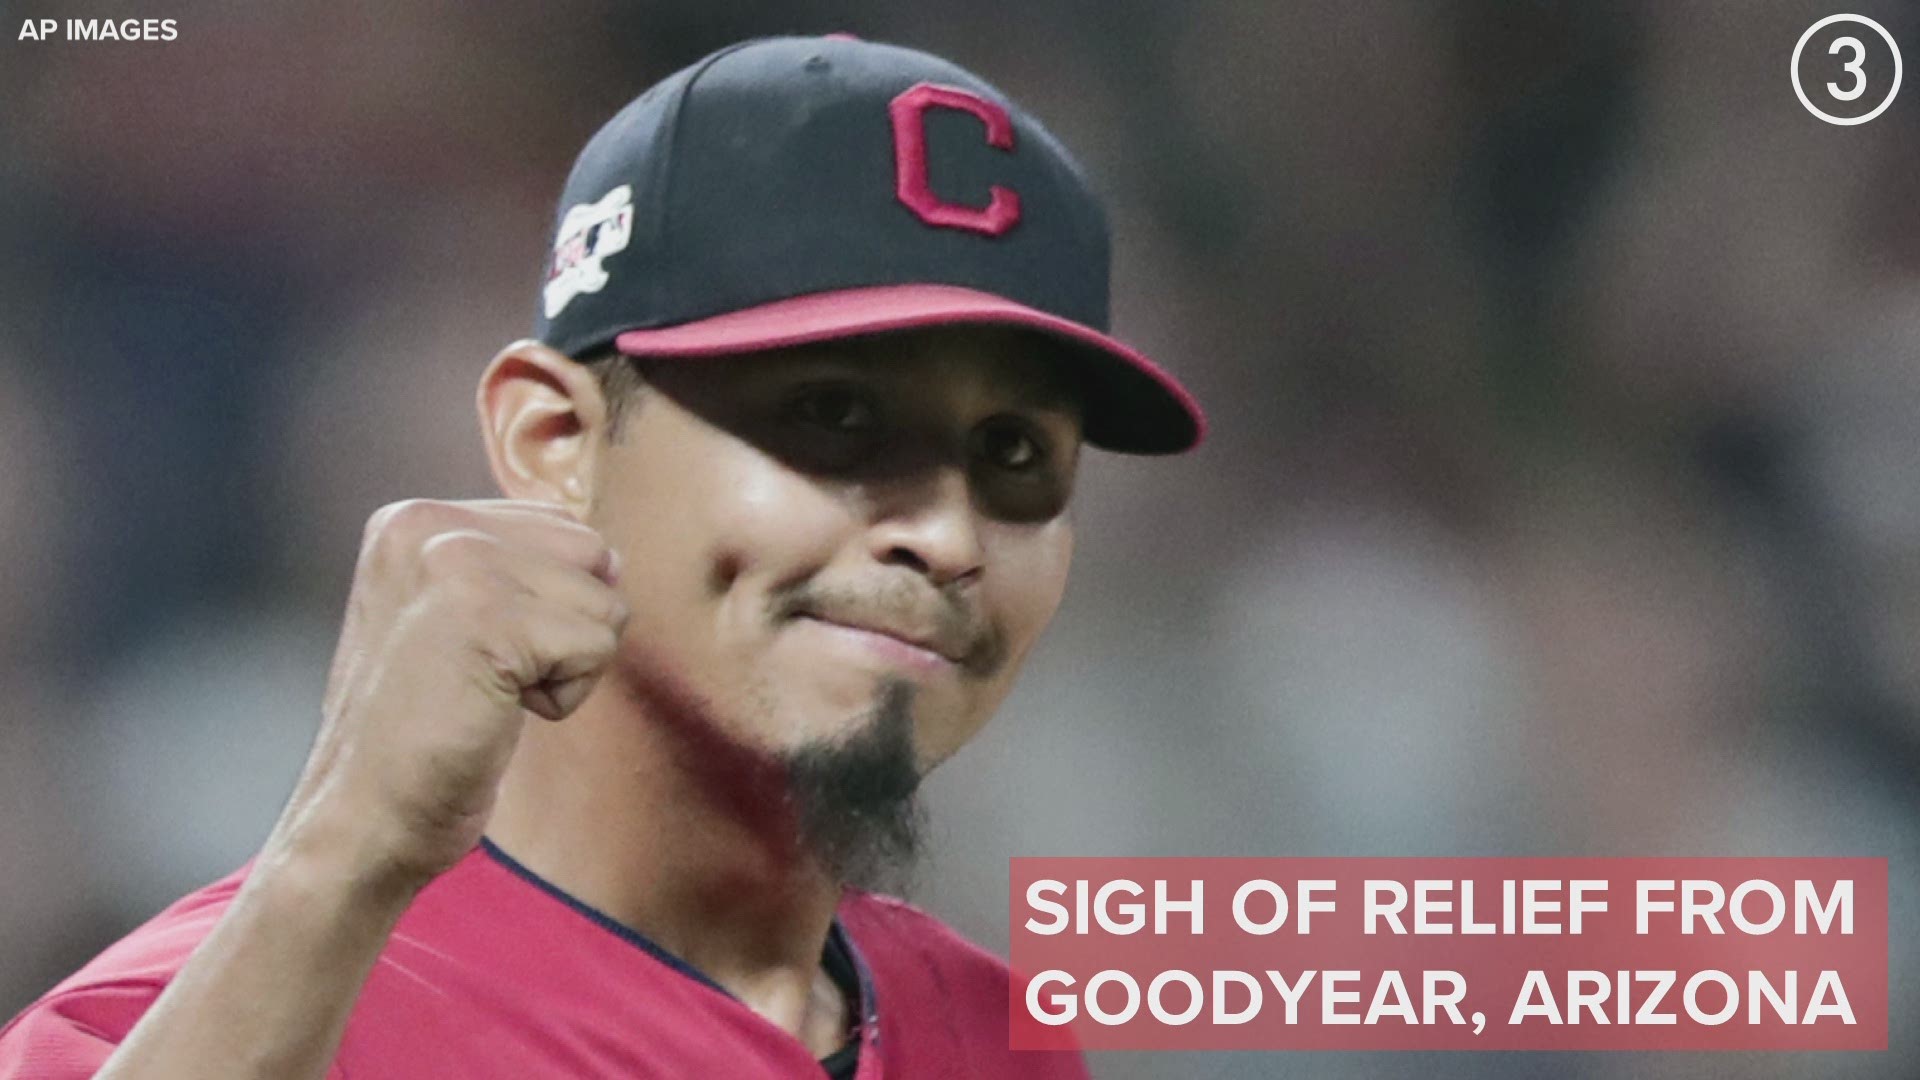 Sigh of relief from Goodyear!  The Cleveland Indians announced on Friday that Carlos Carrasco will be day-to-day with a mild strain of the right hip flexor.